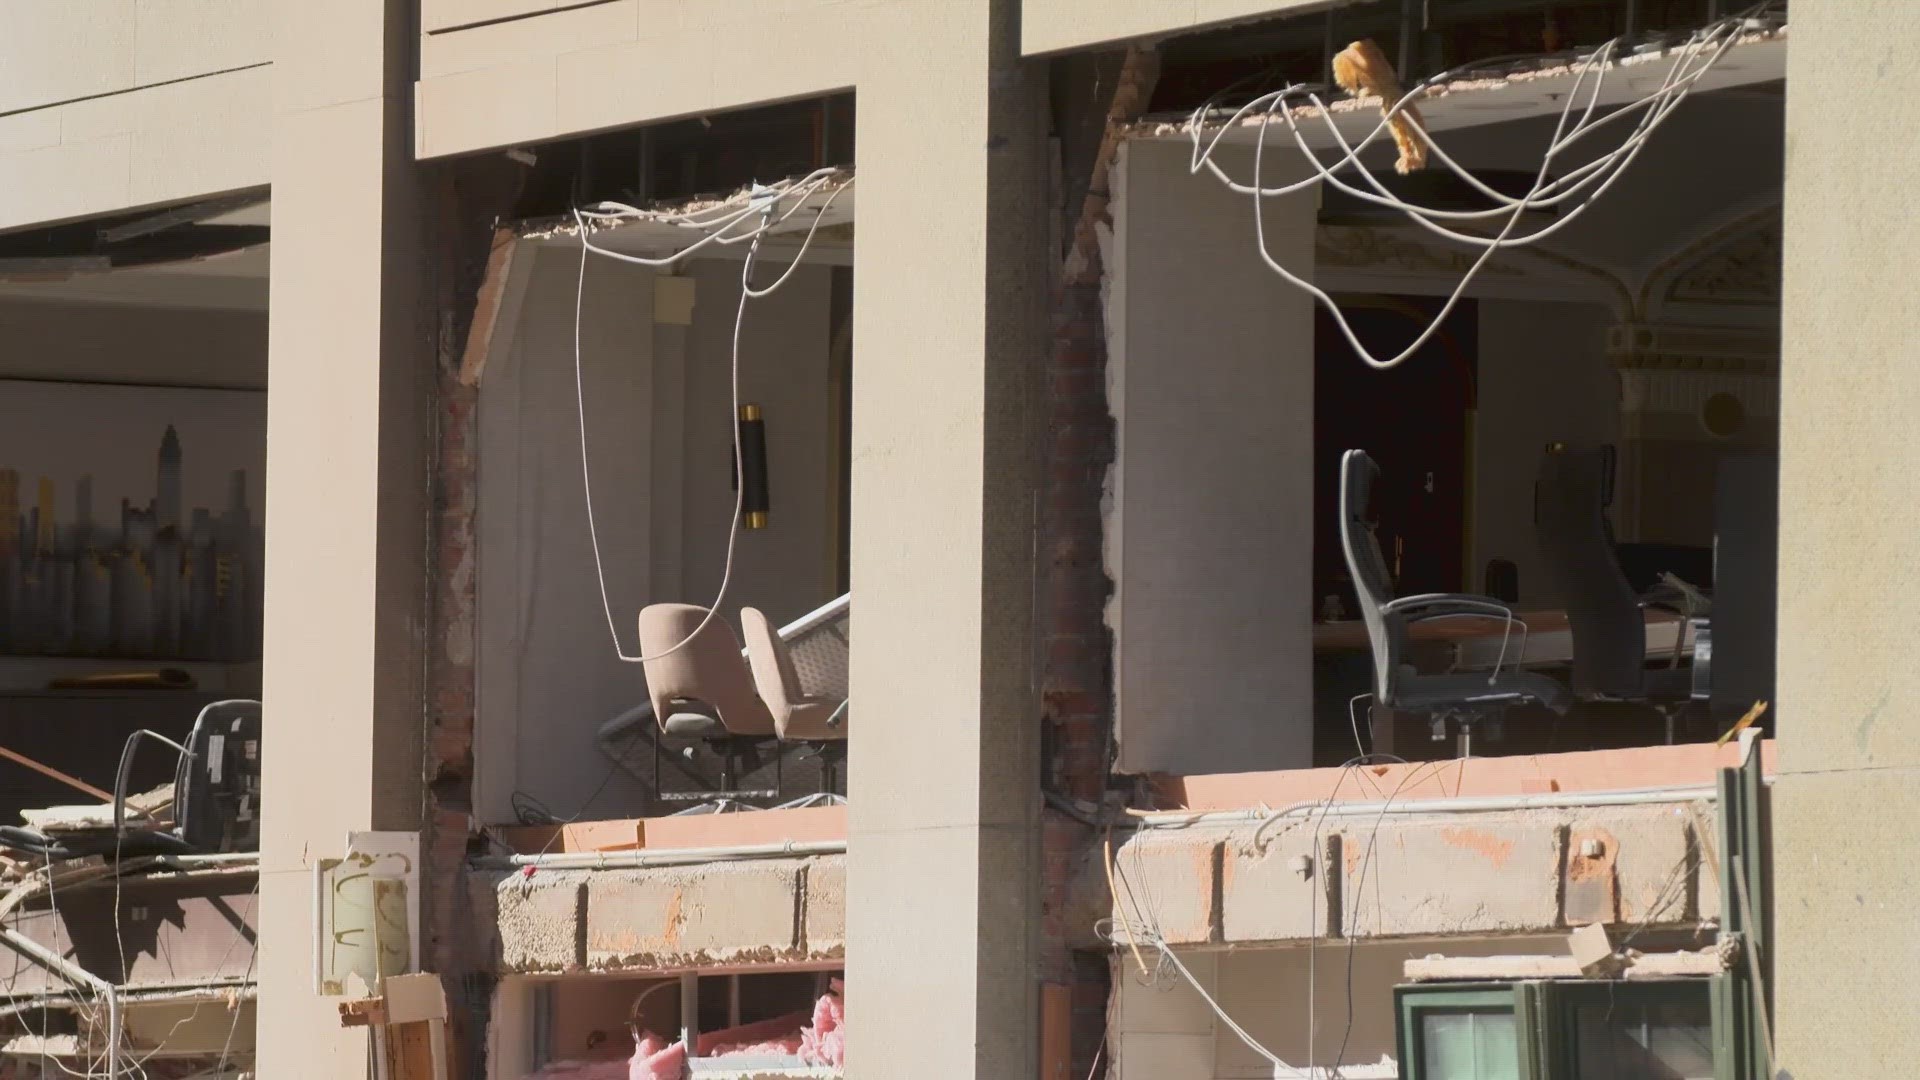 As workers board up windows and walls, investigators are still trying to determine whether a gas leak caused this explosion, or if the explosion caused a gas leak.